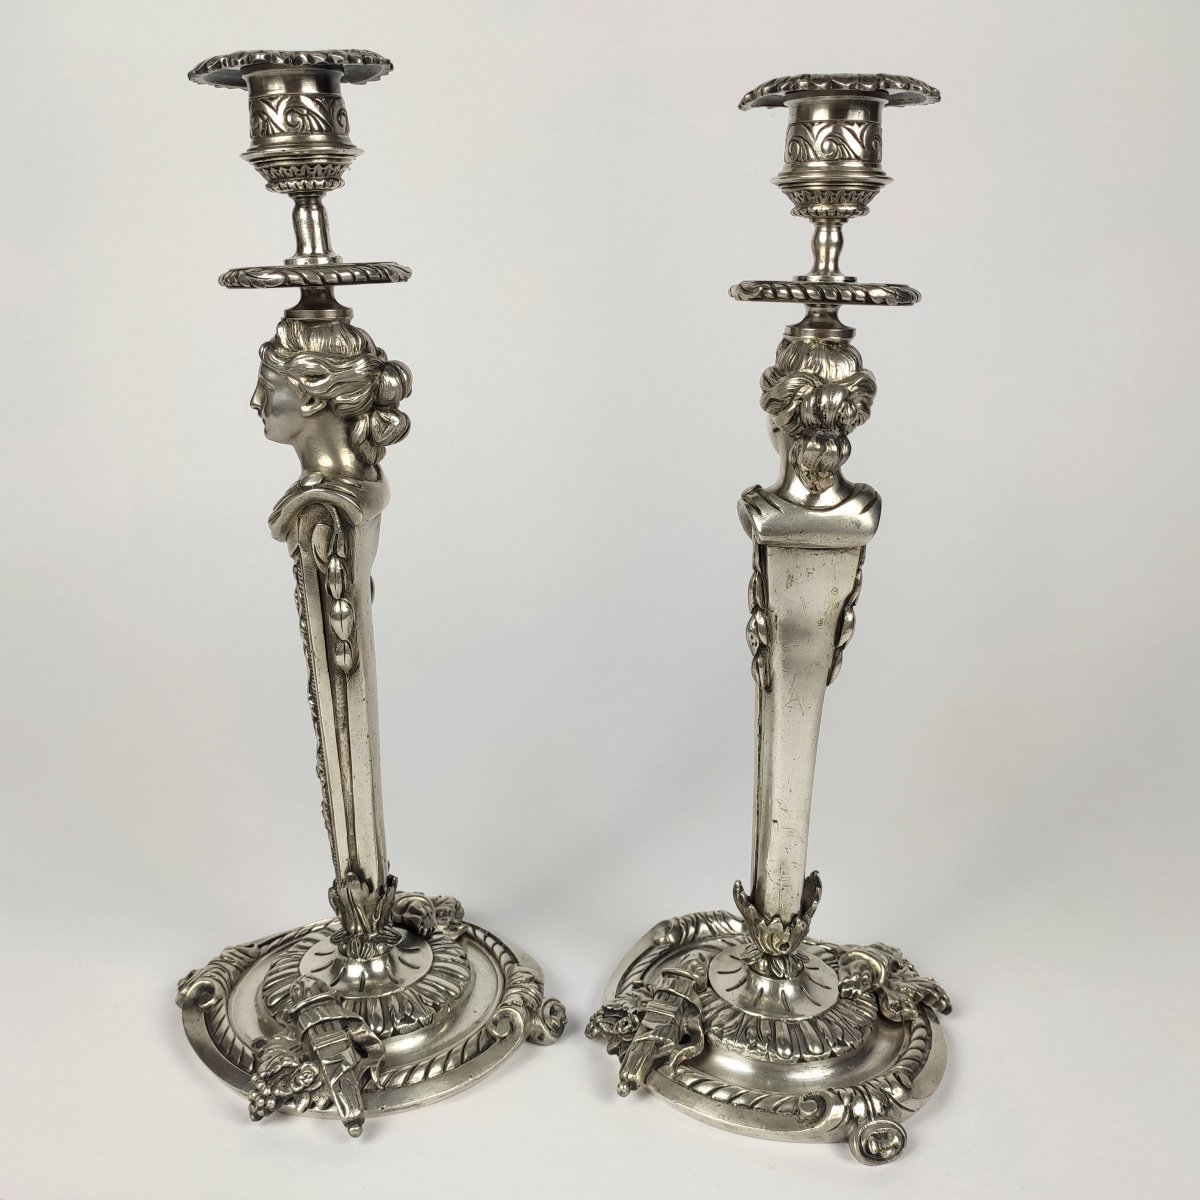 Superb Pair Of Candlesticks In Silvered Bronze, Women In Terms, Antique Style. Nineteenth Century.-photo-3